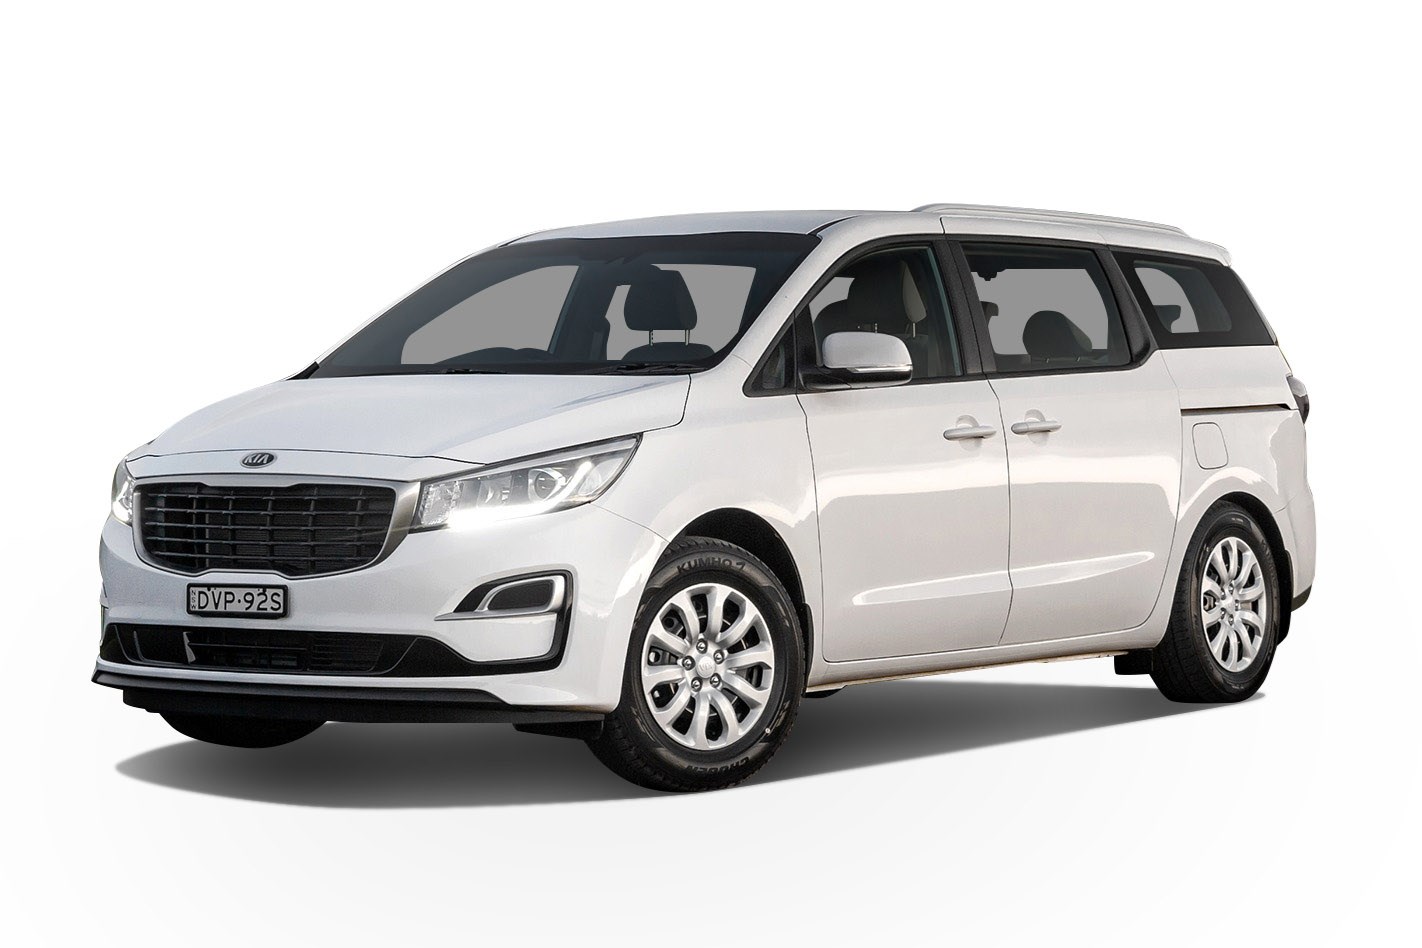 2019 KIA Carnival S, 3.3L 6cyl Petrol Automatic, People Mover